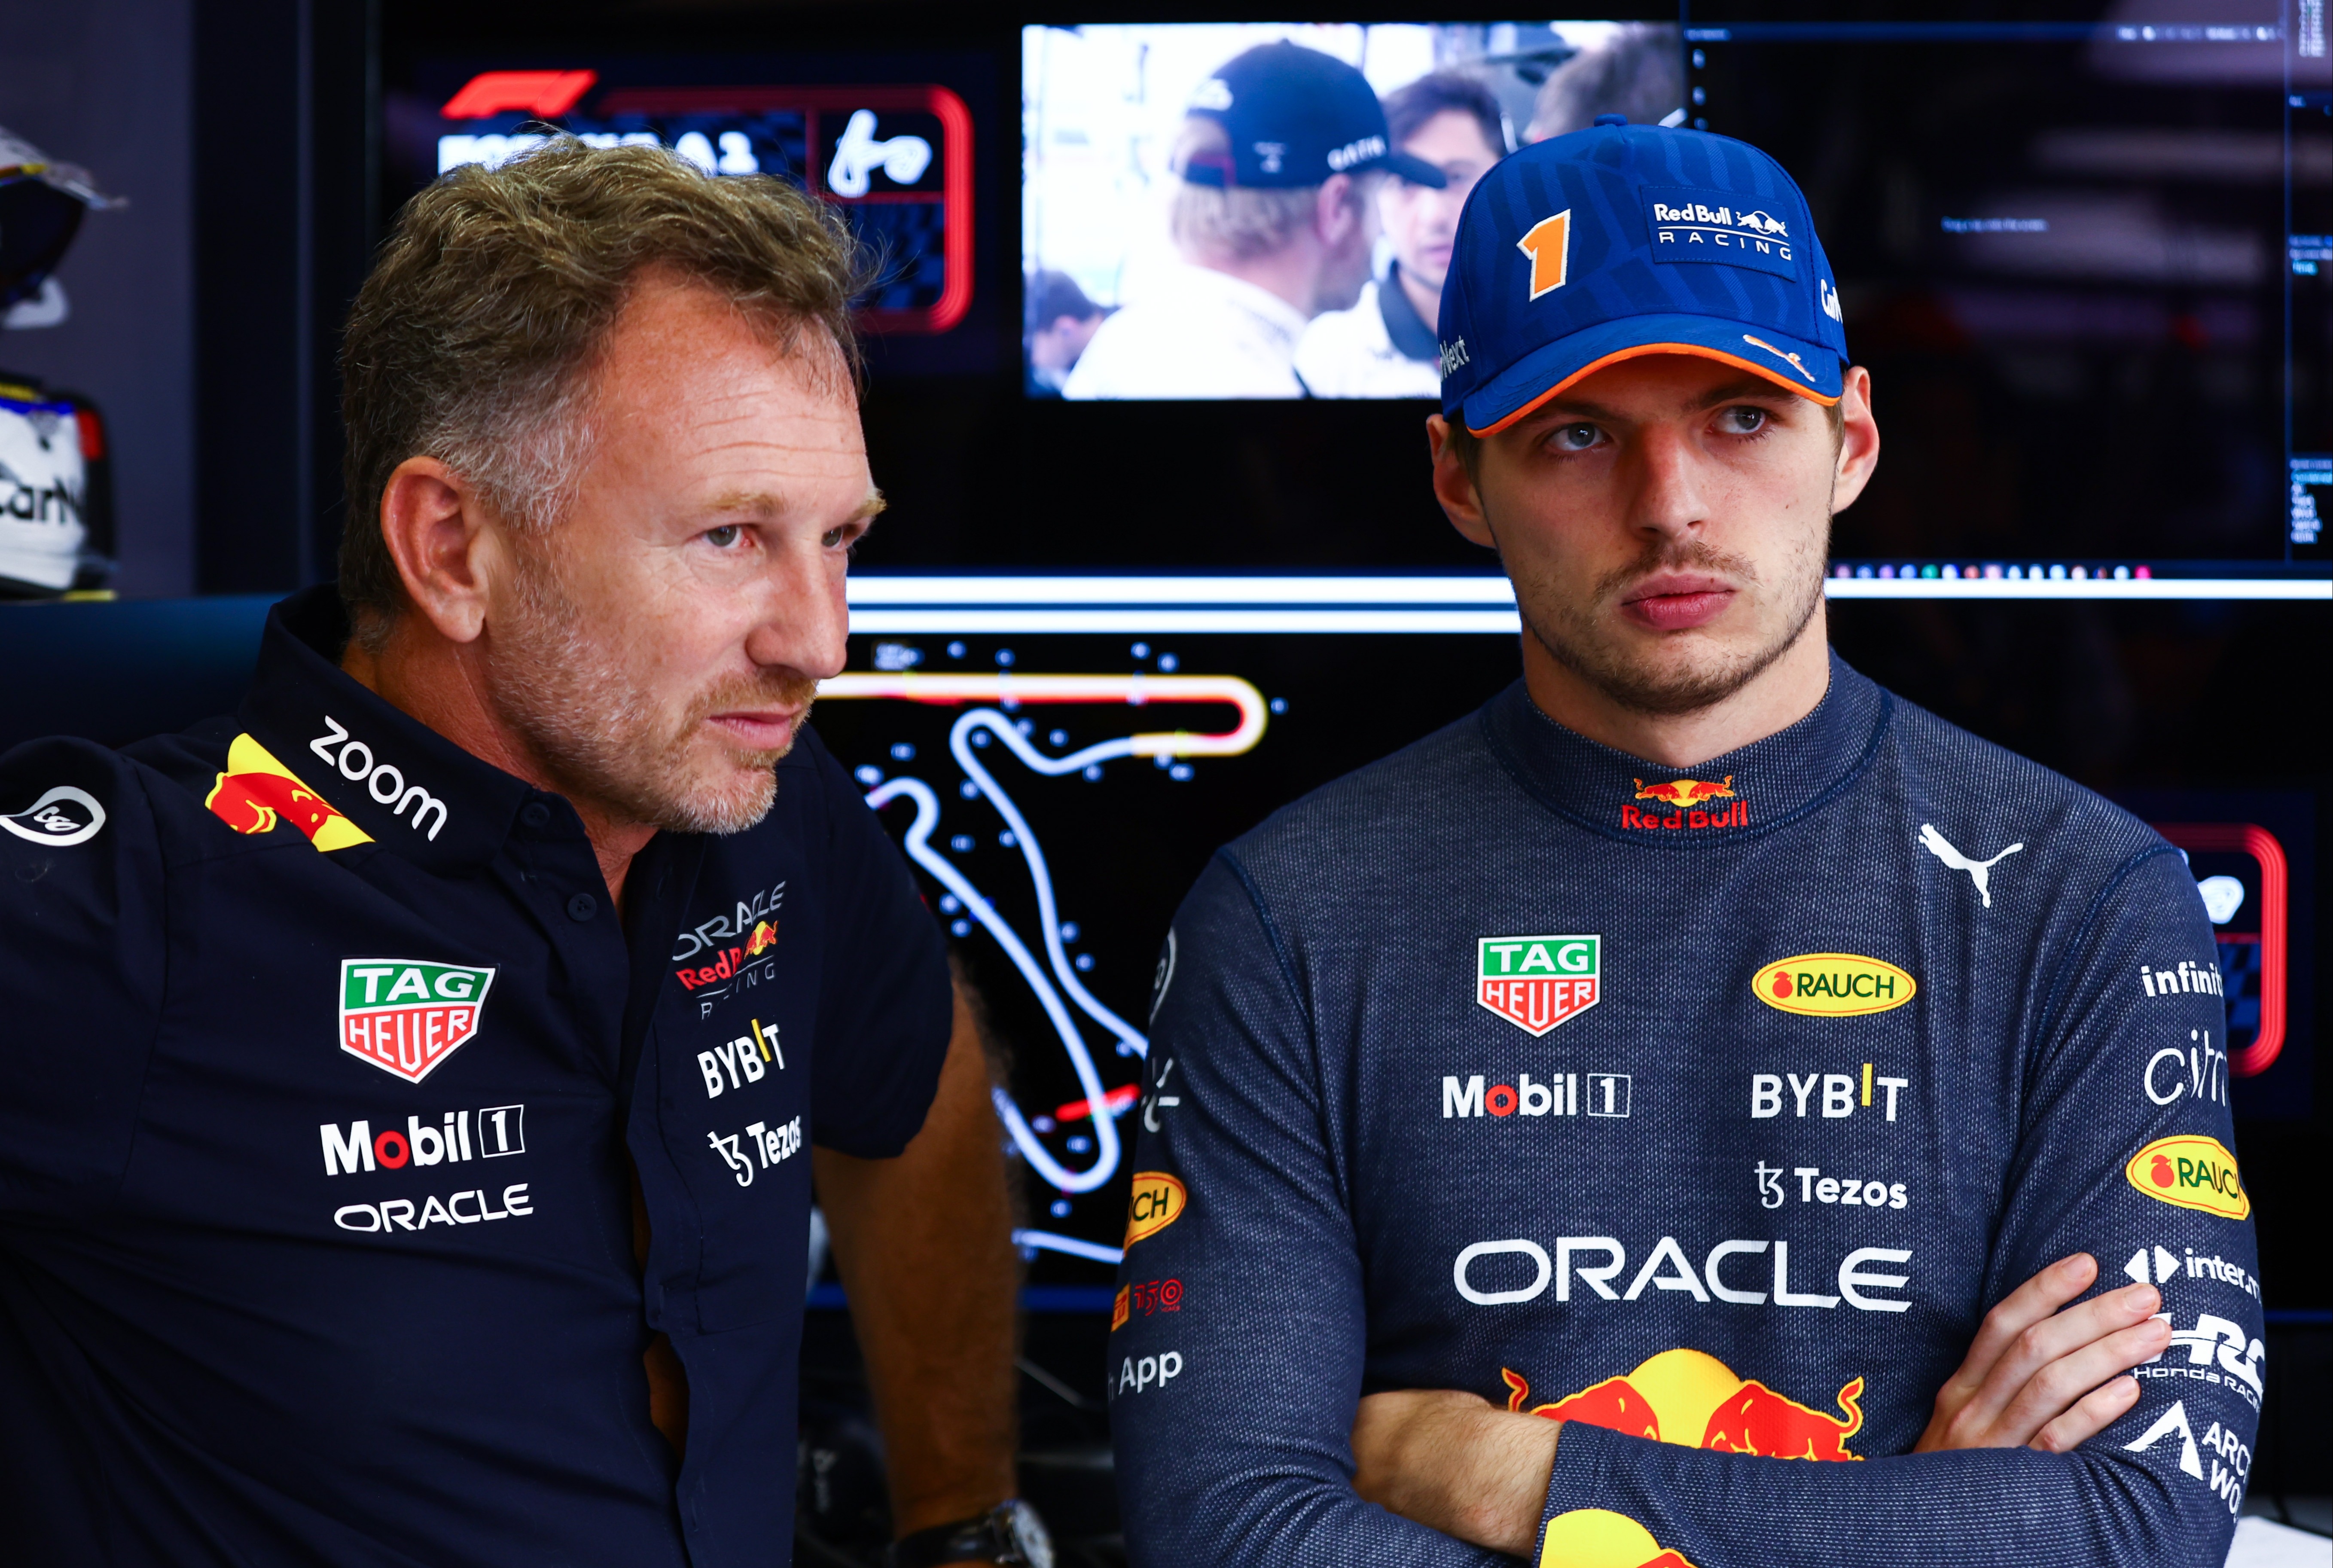 Newey is claimed to have been left 'unsettled' by Horner's scandal